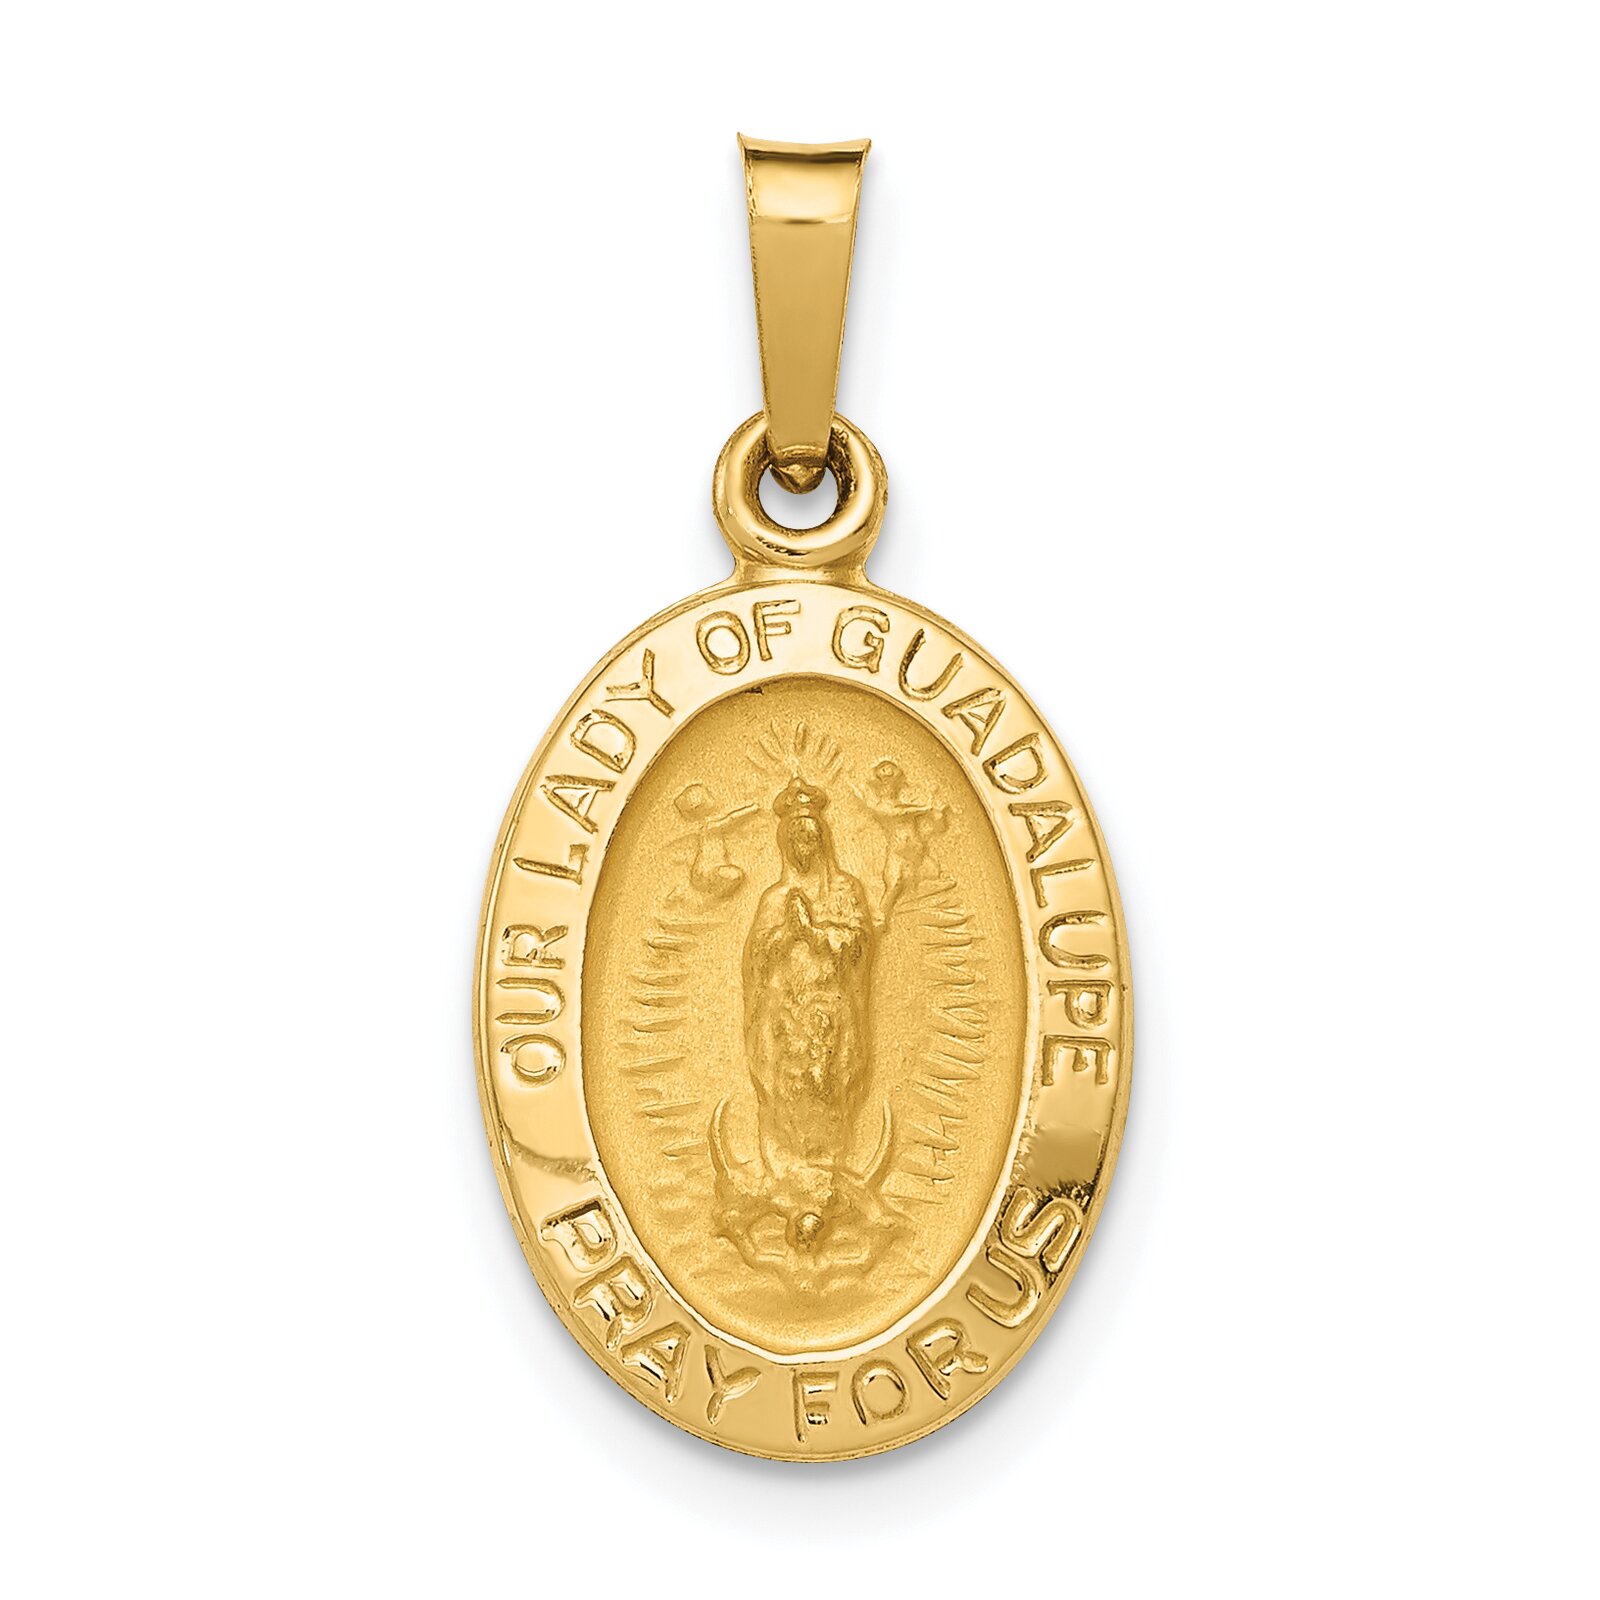 Findingking 14K Gold Our Lady Of Guadalupe Medal Charm